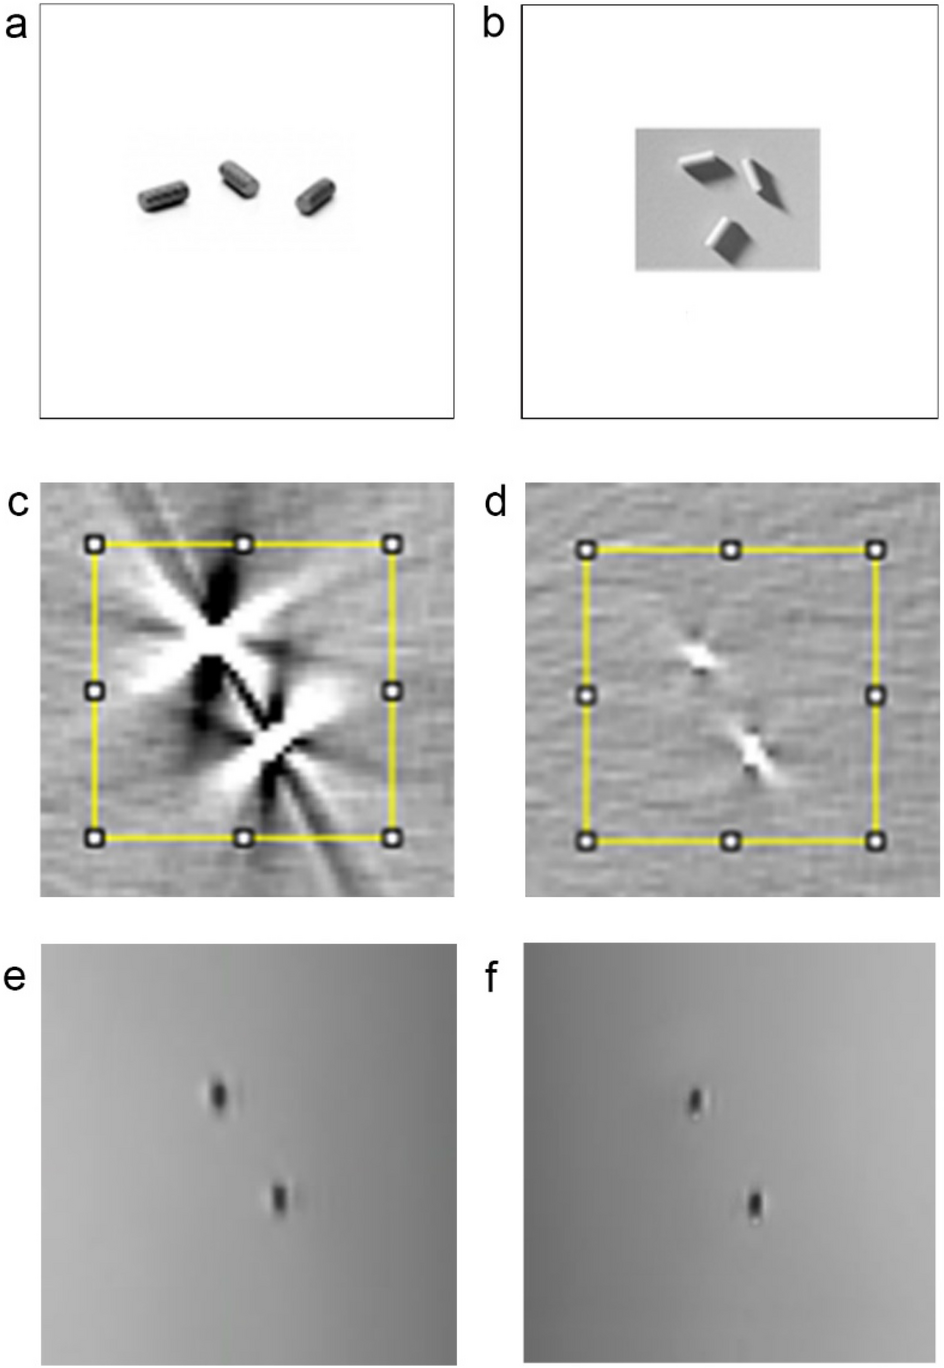 A phantom study to contrast and compare polymer and gold fiducial markers  in radiotherapy simulation imaging | Scientific Reports